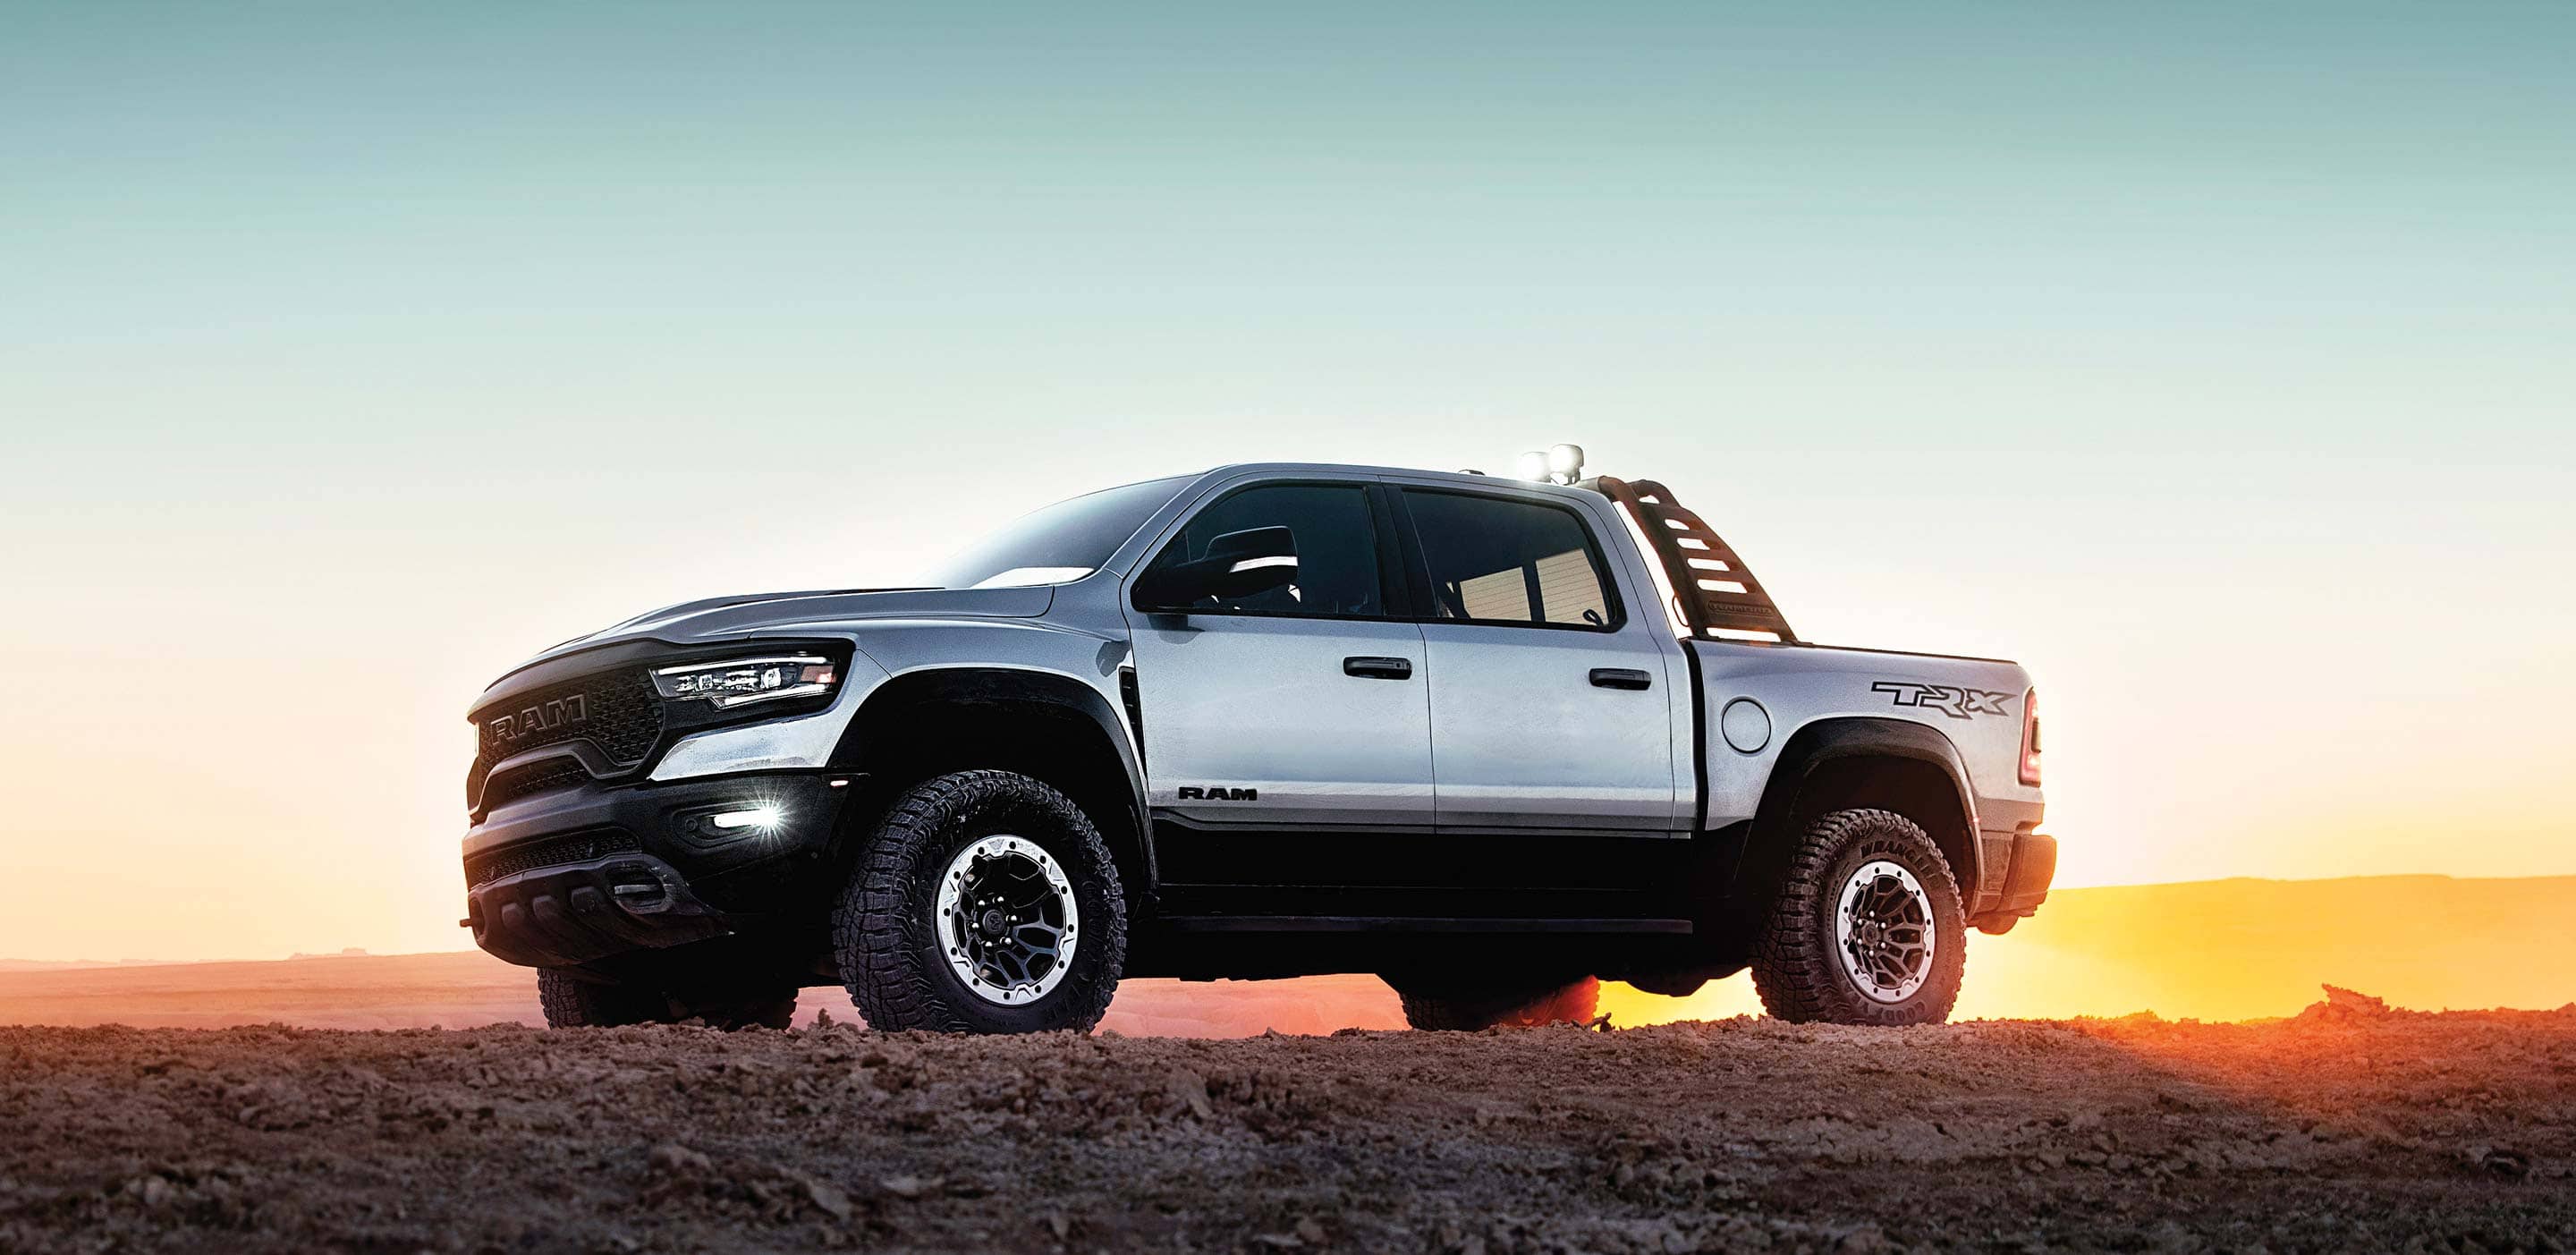 Display A side profile of the 2023 Ram 1500 TRX, parked in the desert with the sun setting behind it.